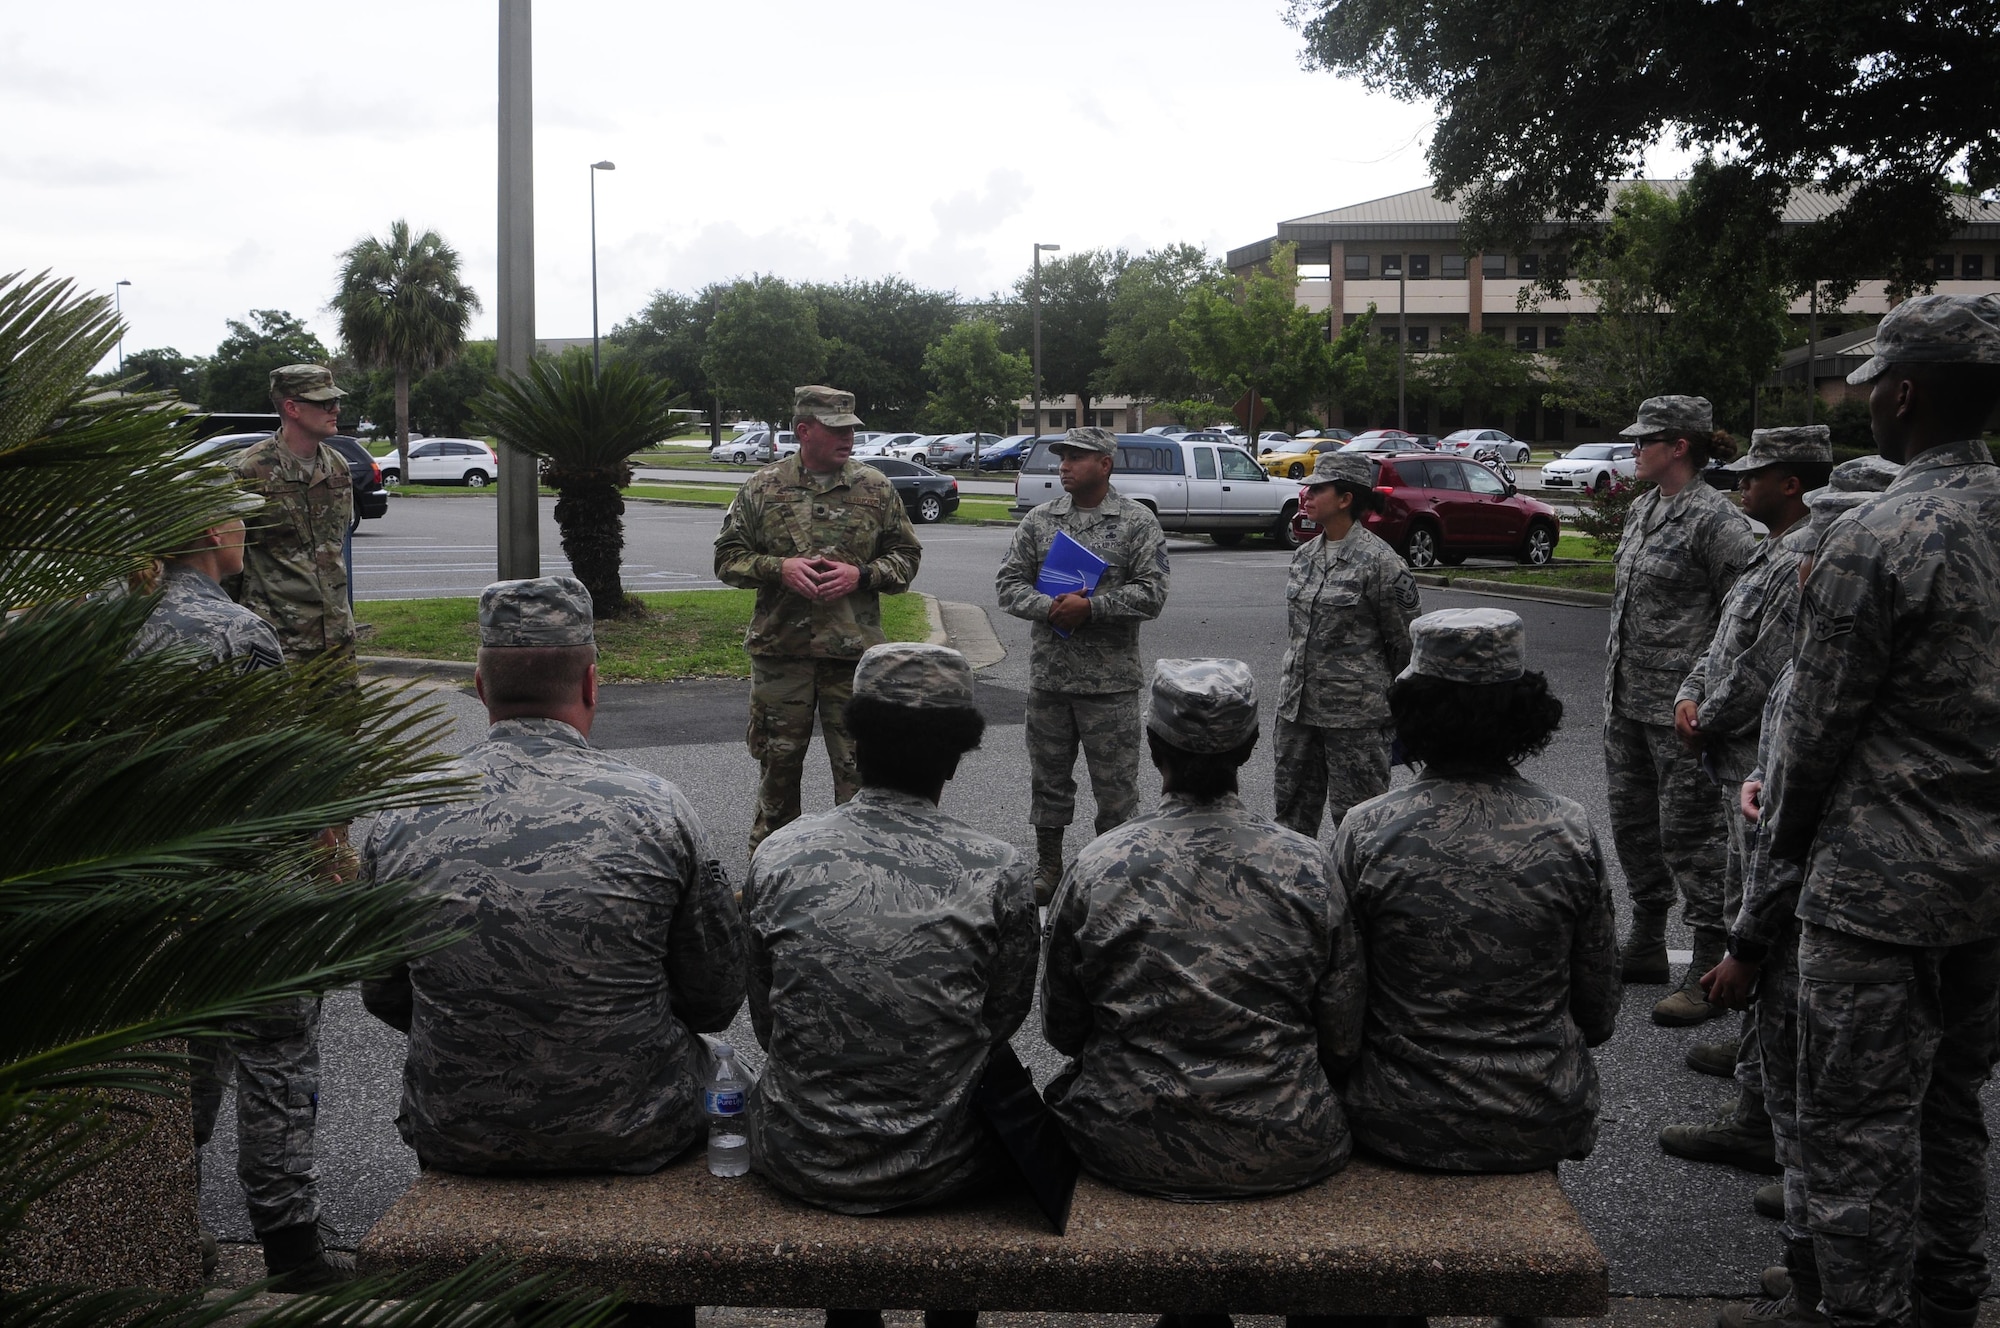 Lt. Col. Christopher Davis, commander of the 137th Special Operations Force Support Squadron at Will Rogers Air National Guard Base in Oklahoma City, gives remarks to members of his squadron during their annual training days at the 1st Special Operations Wing, Hurlburt Field, Florida, Aug. 11, 2017. Twenty Airmen from the 137 SOFSS attended the training event to integrate with active duty personnel on lodging, mortuary, fitness, contingency operations, training, readiness and other duties that are part of their squadron readiness requirements. (U.S. Air National Guard photo by Tech. Sgt. Trisha K. Shields/Released)